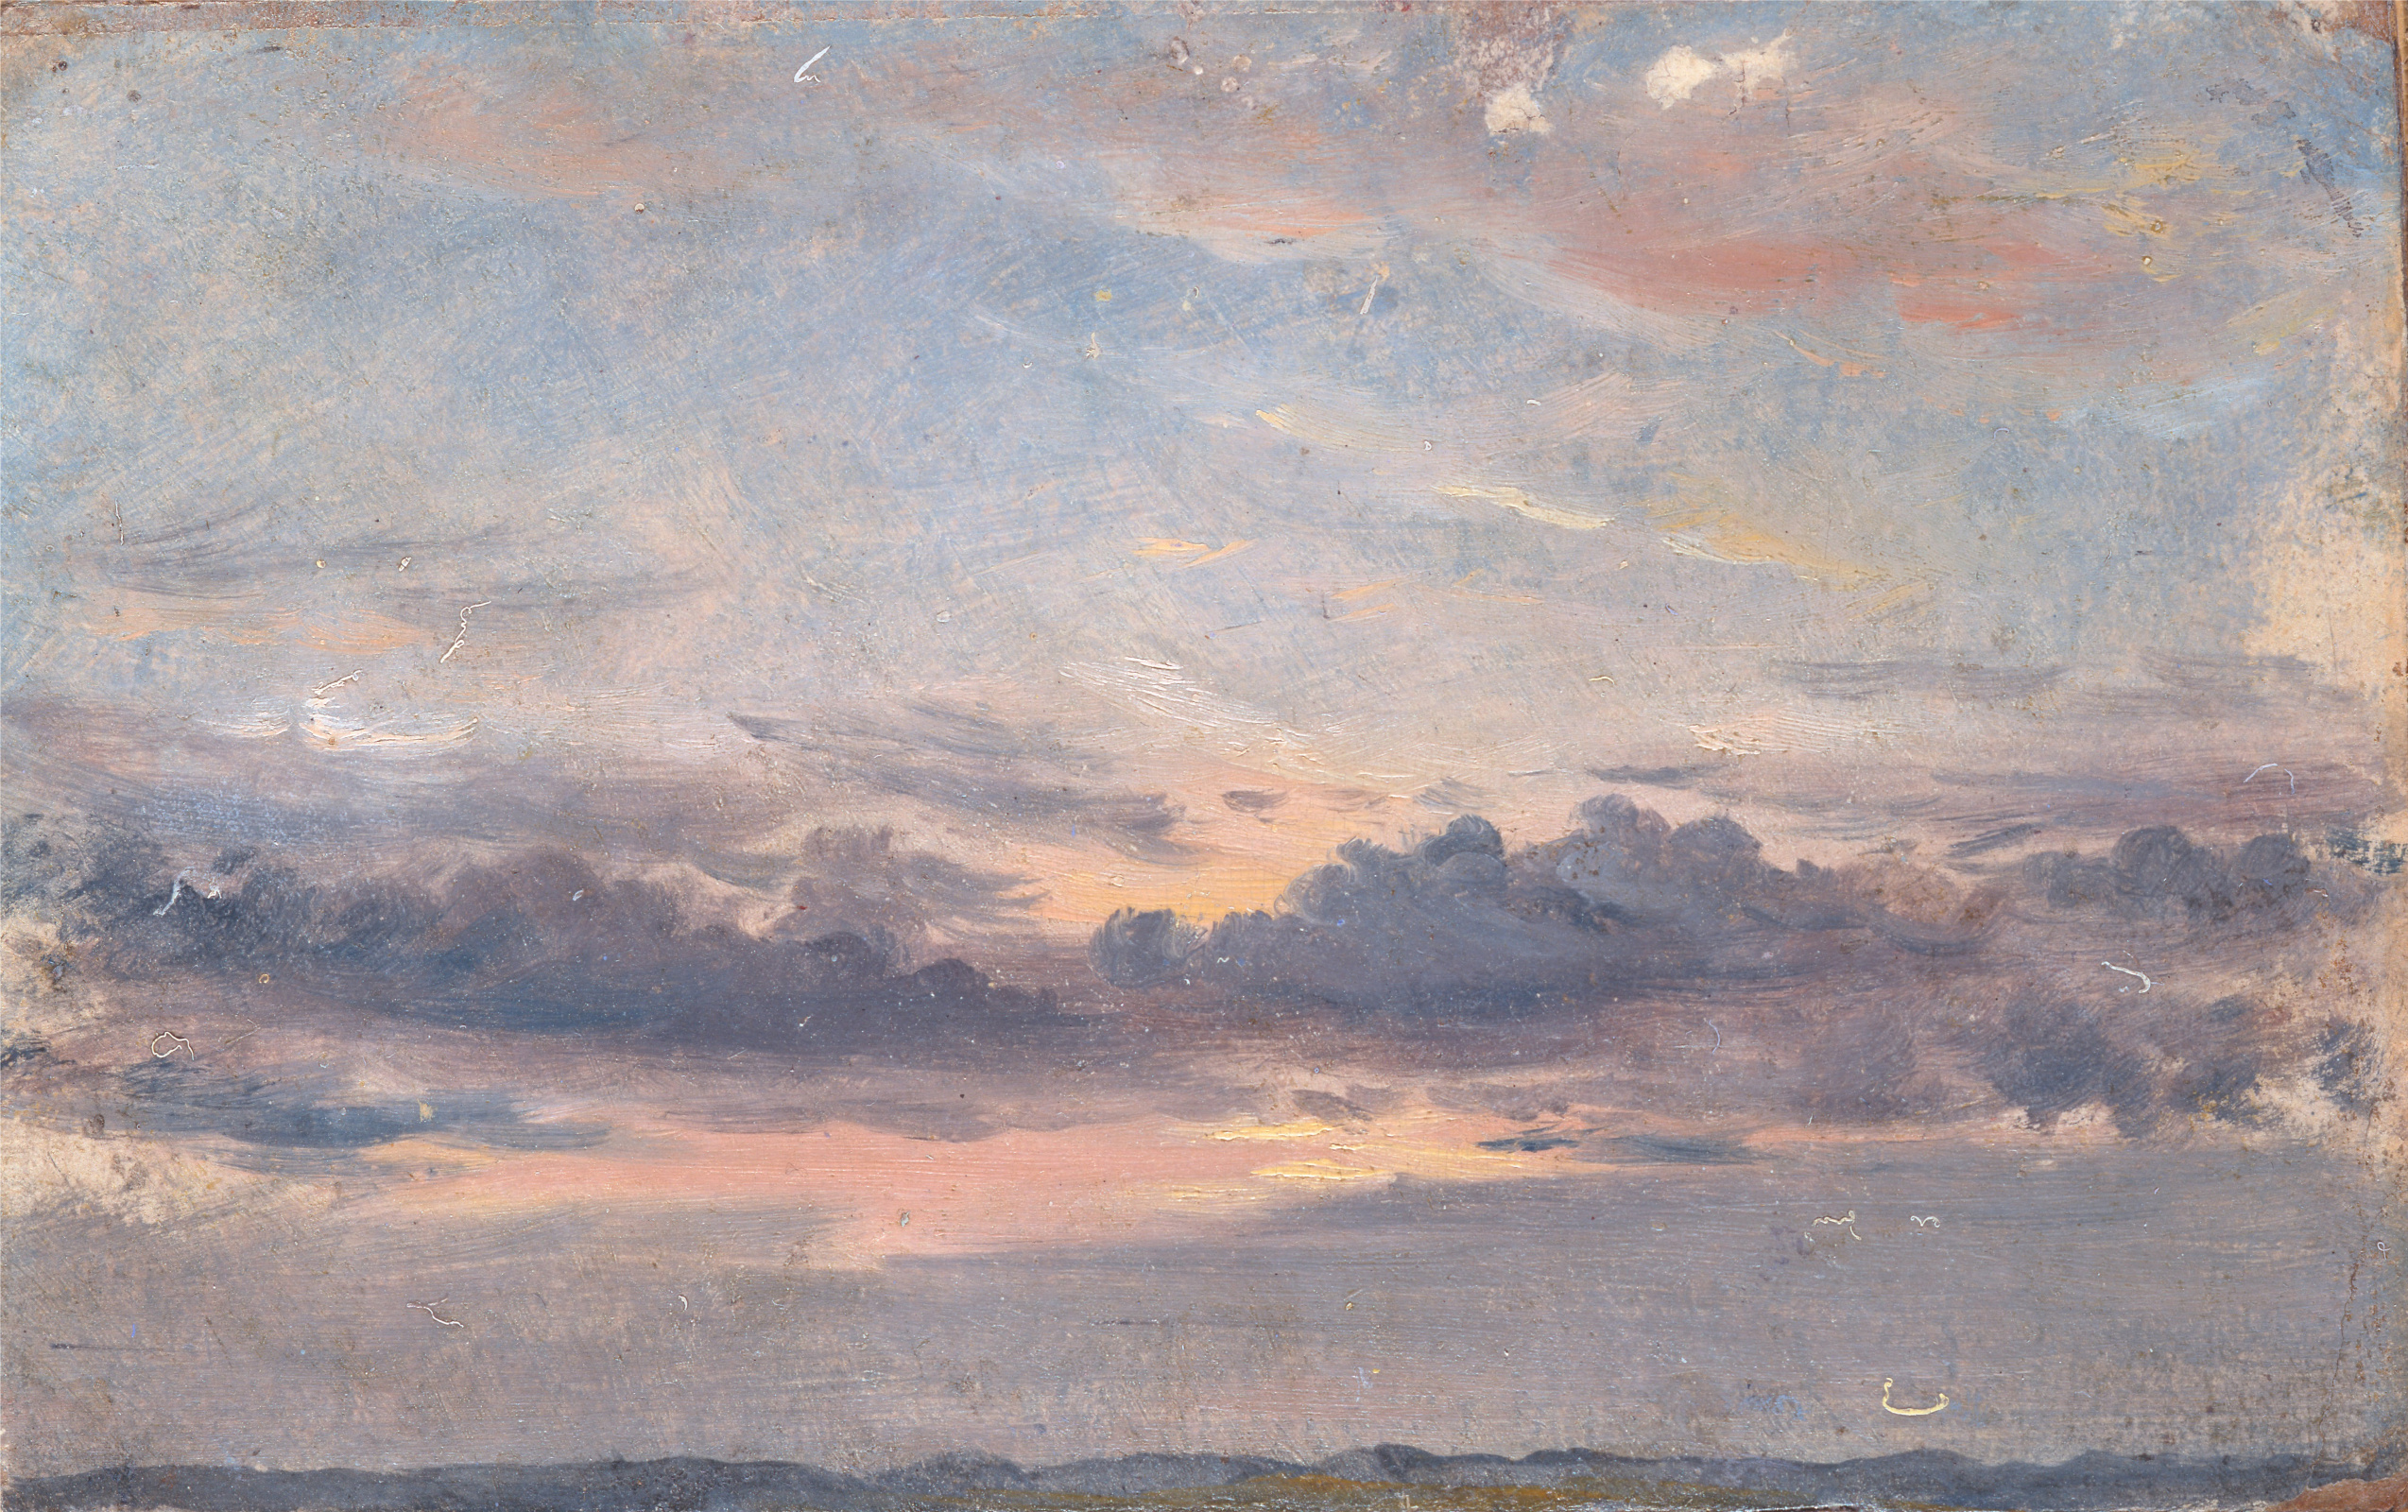 Buy Digital Version Cloudy Sky Sunset Sketch By John Constable Arthive